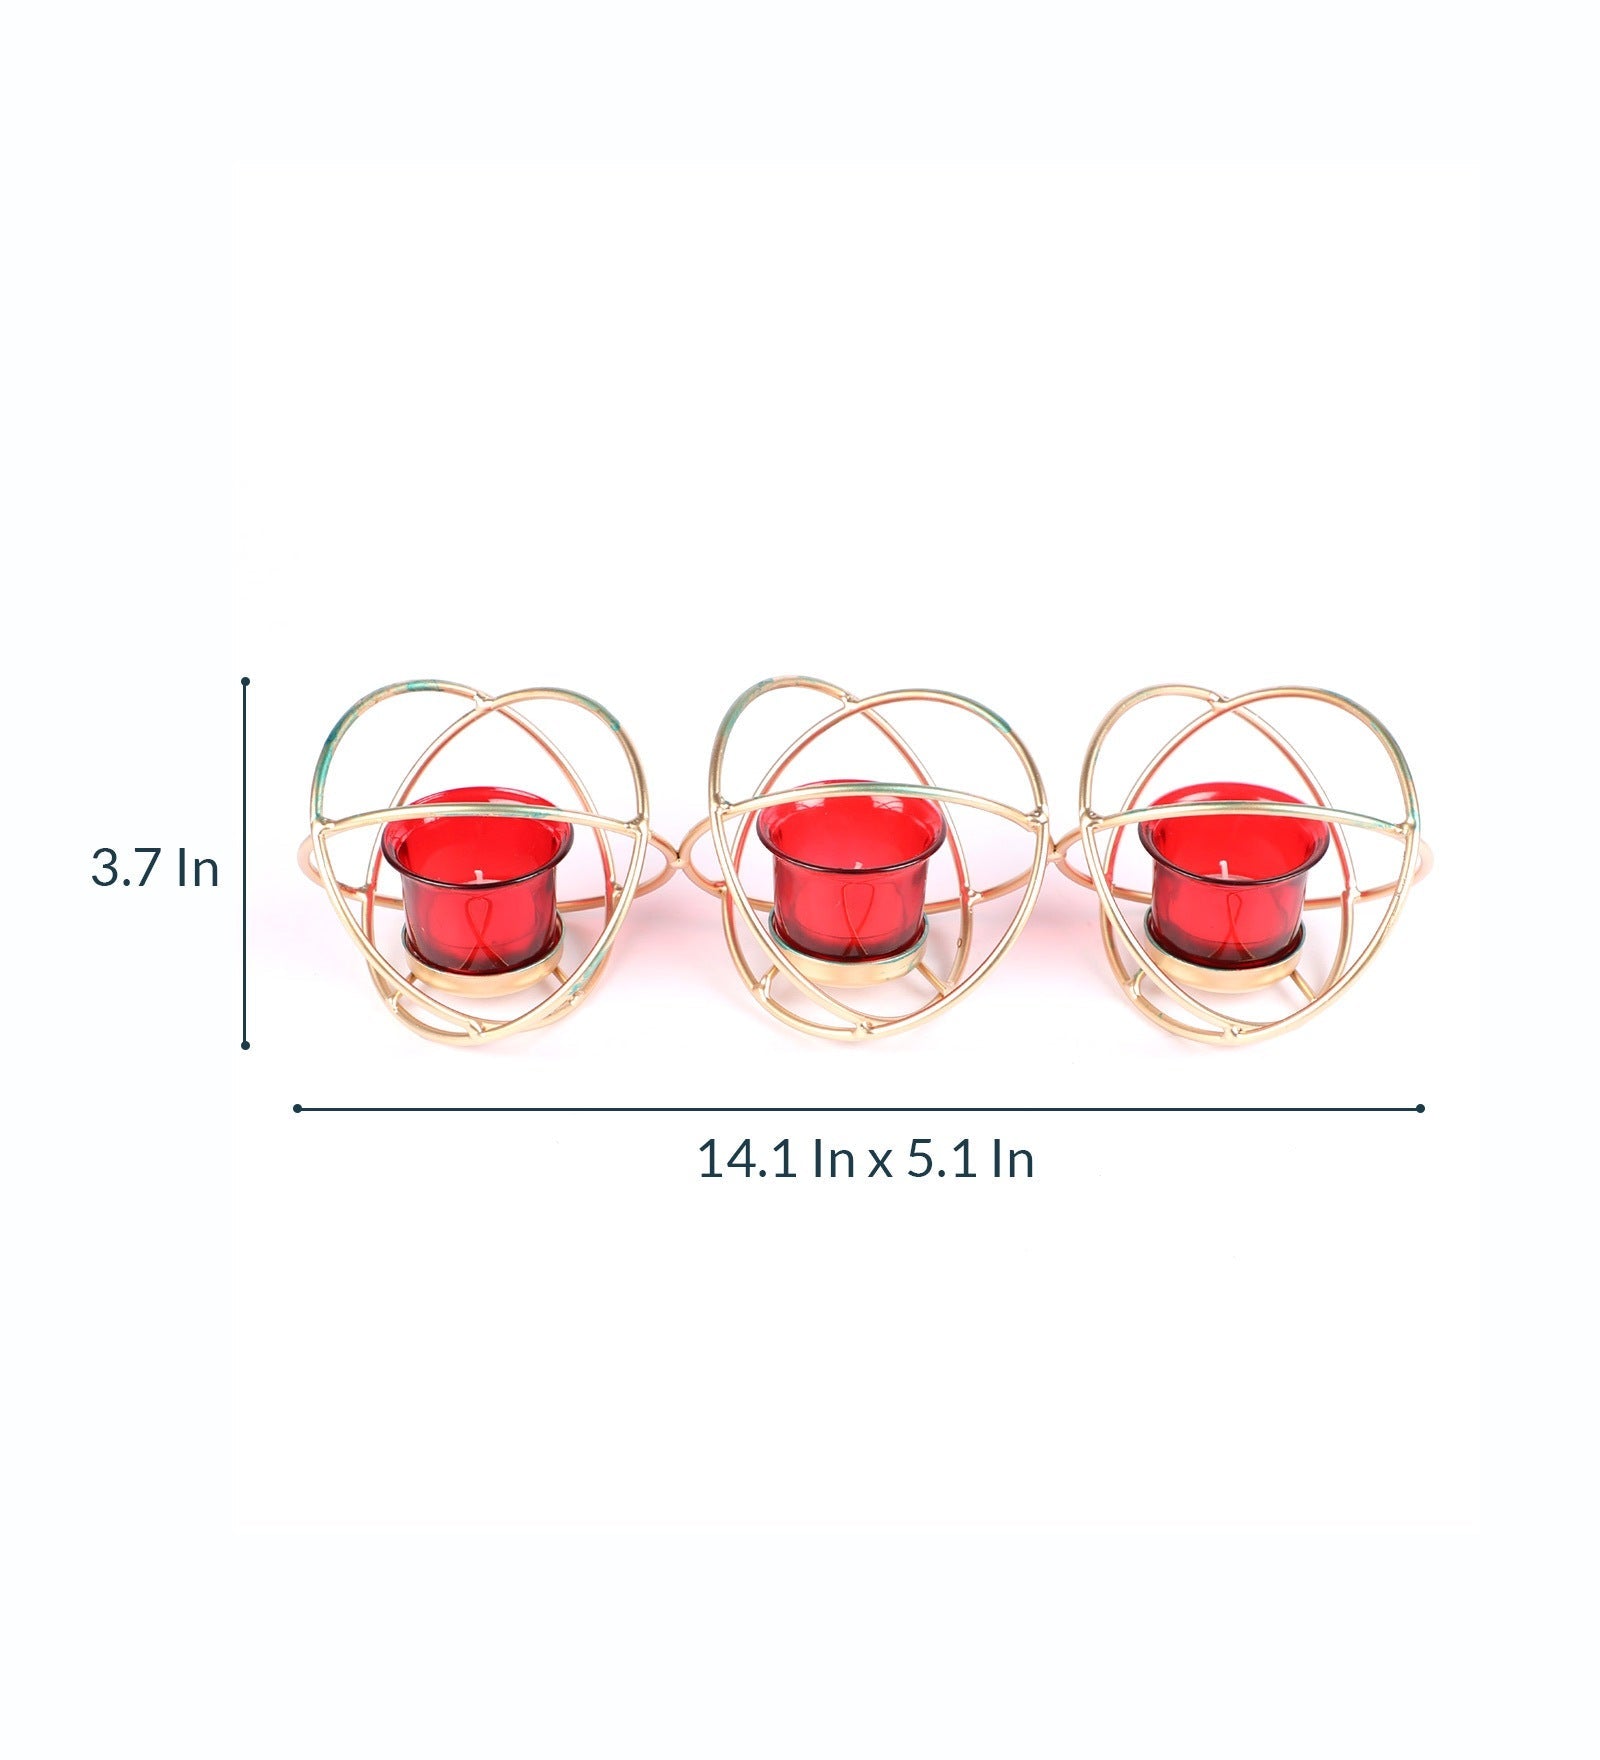 Hosley Iron Tealight Candle Holder With Red Glass cup and free Tealight for Home Decoration